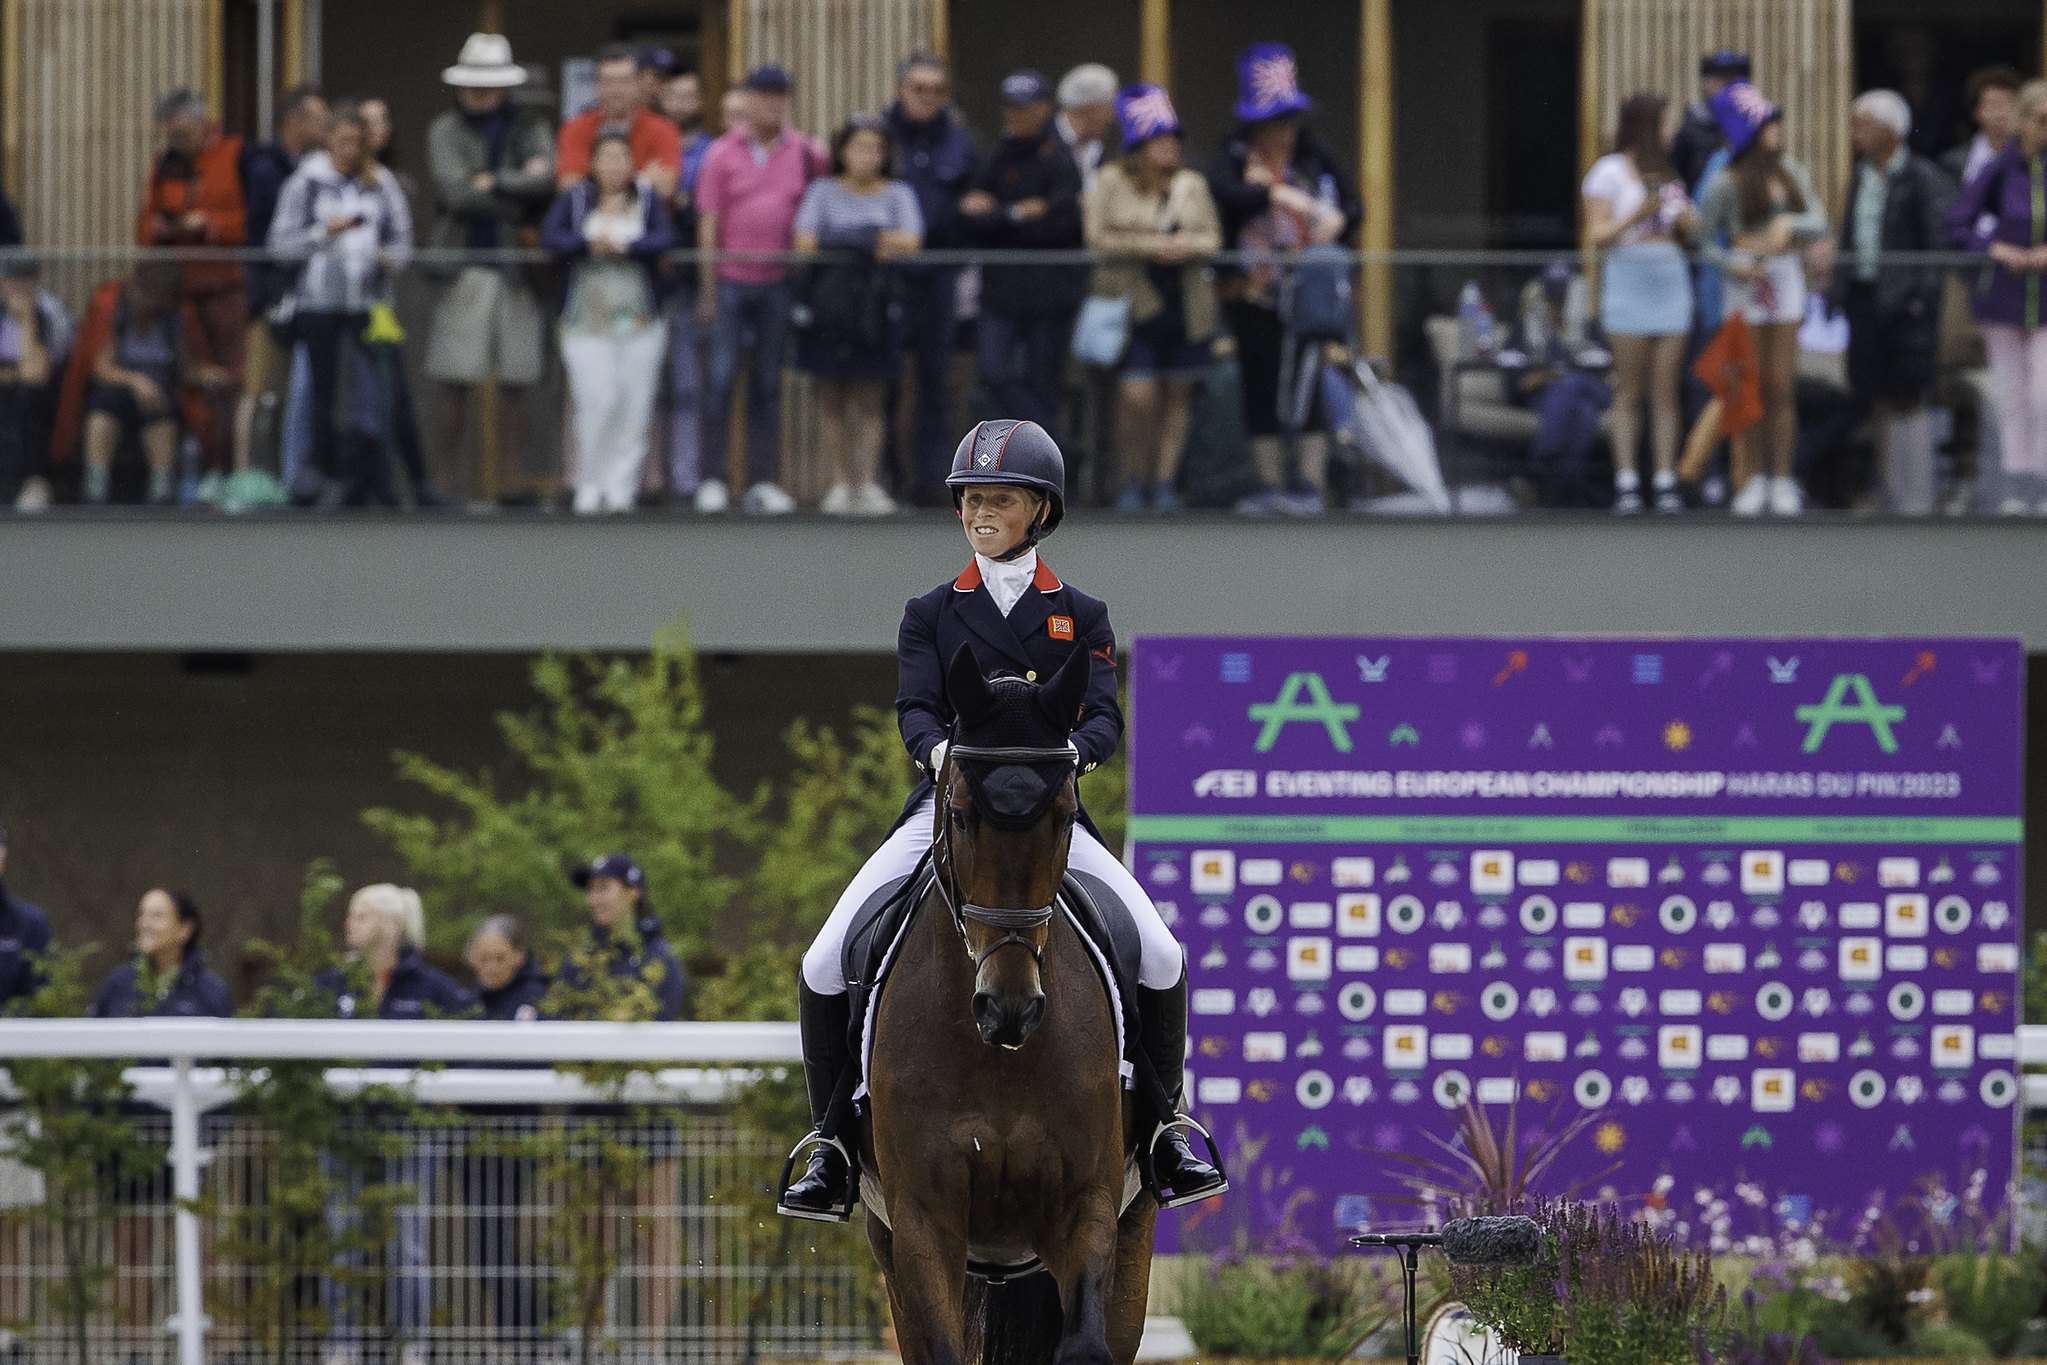 Rosalind Canter rides Lordships Graffalo during the second day of dressage. Interim-2nd. 2023 FRA-FEI Eventing European Championships | Haras du Pin, France. Friday 11 August 2023. Copyright Photo: FEI/Libby Law Photography